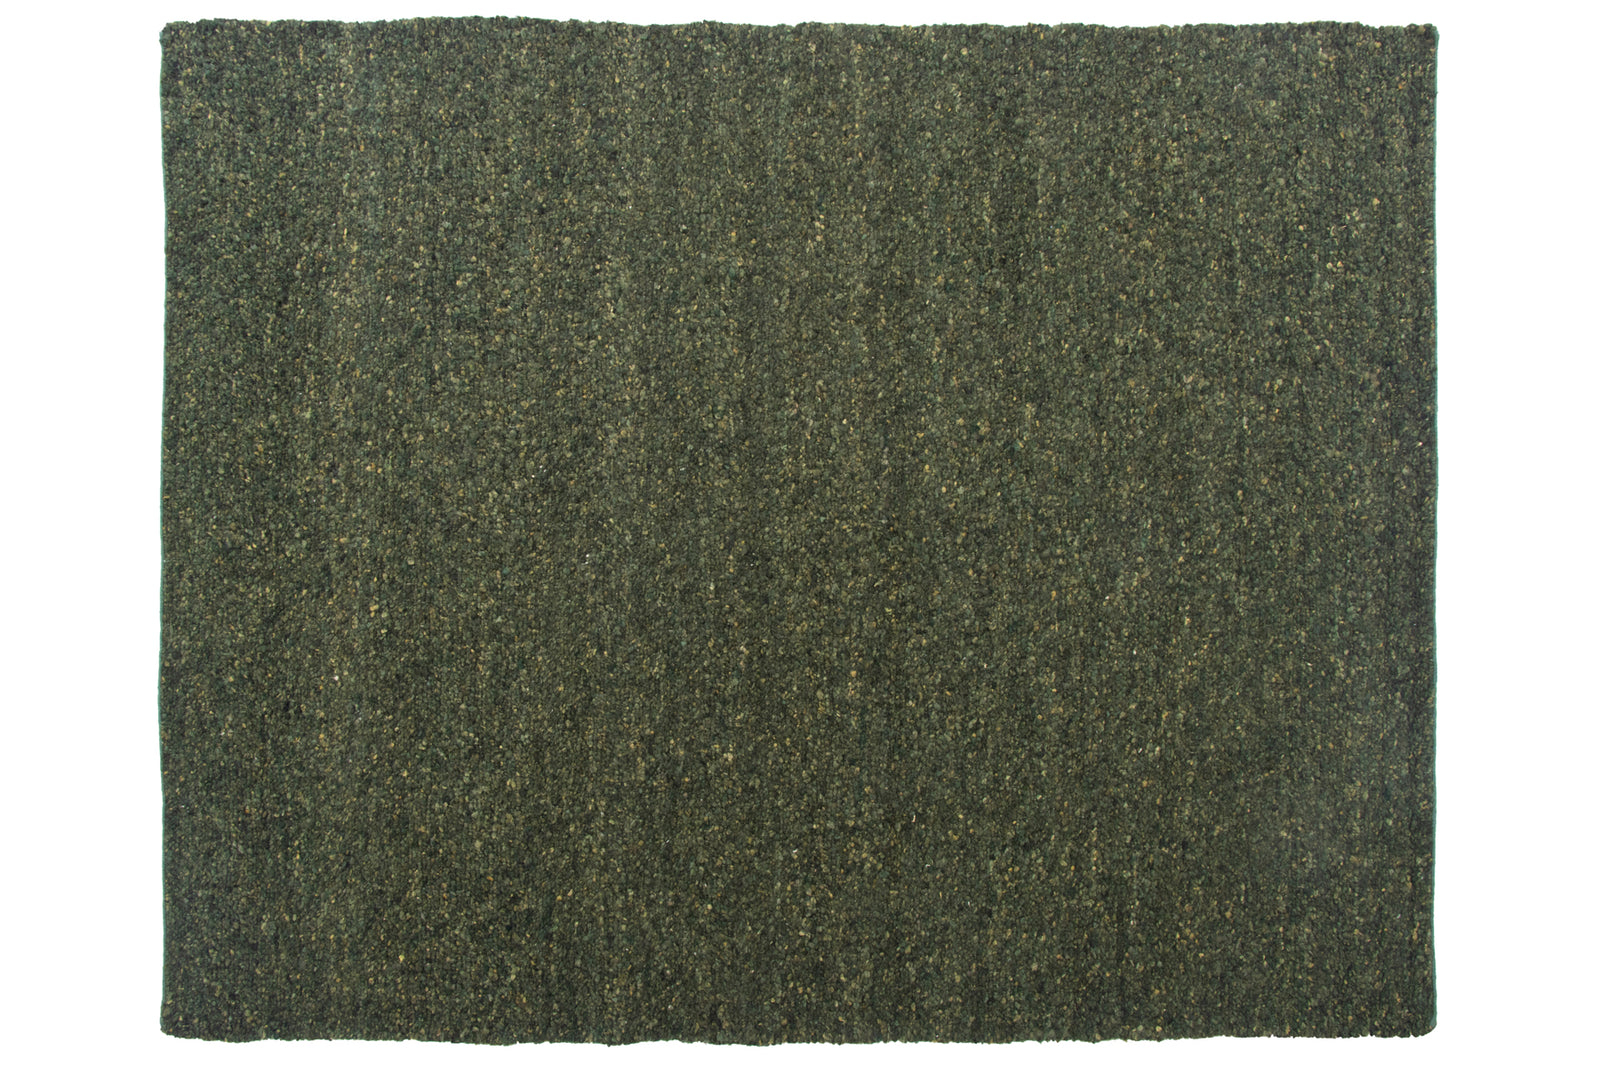 Sweater rug in forest BHN